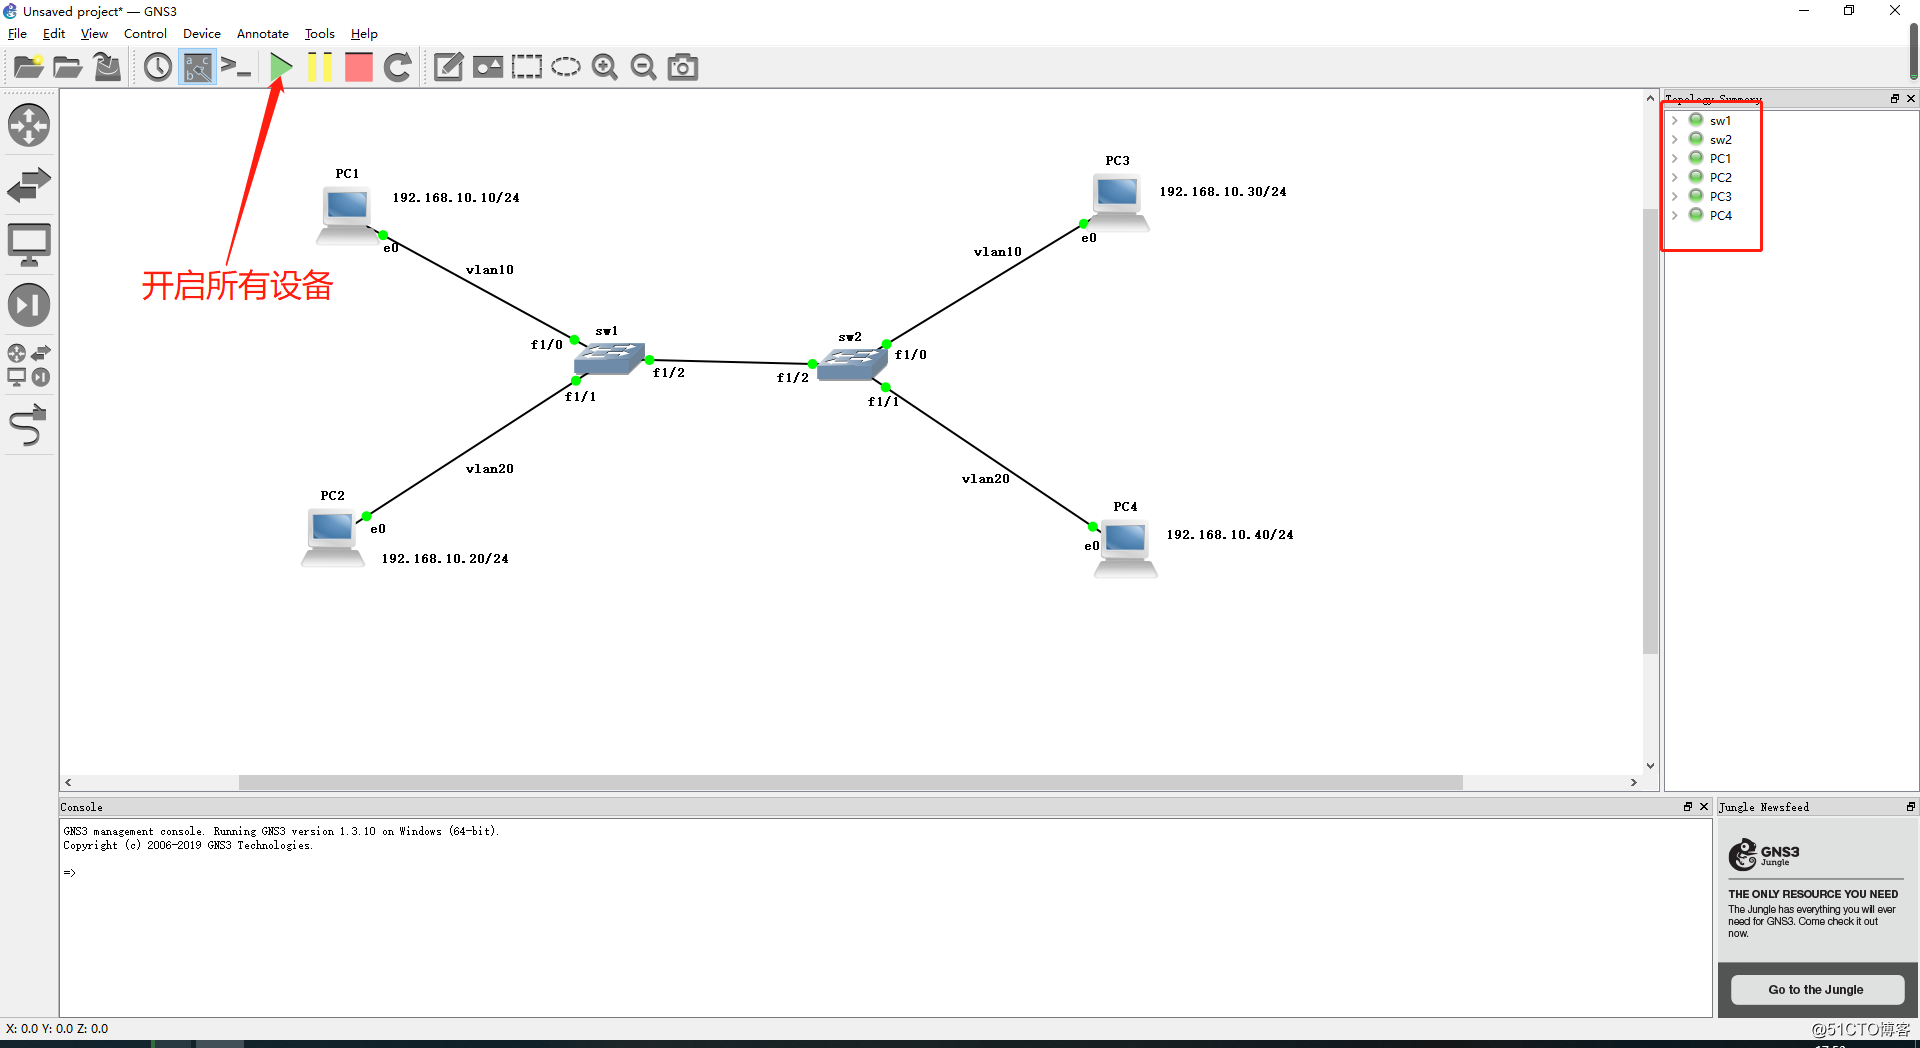 VLAN base (B) used in GNS3 1.3.10 Trunk completed VLAN communication across the switch